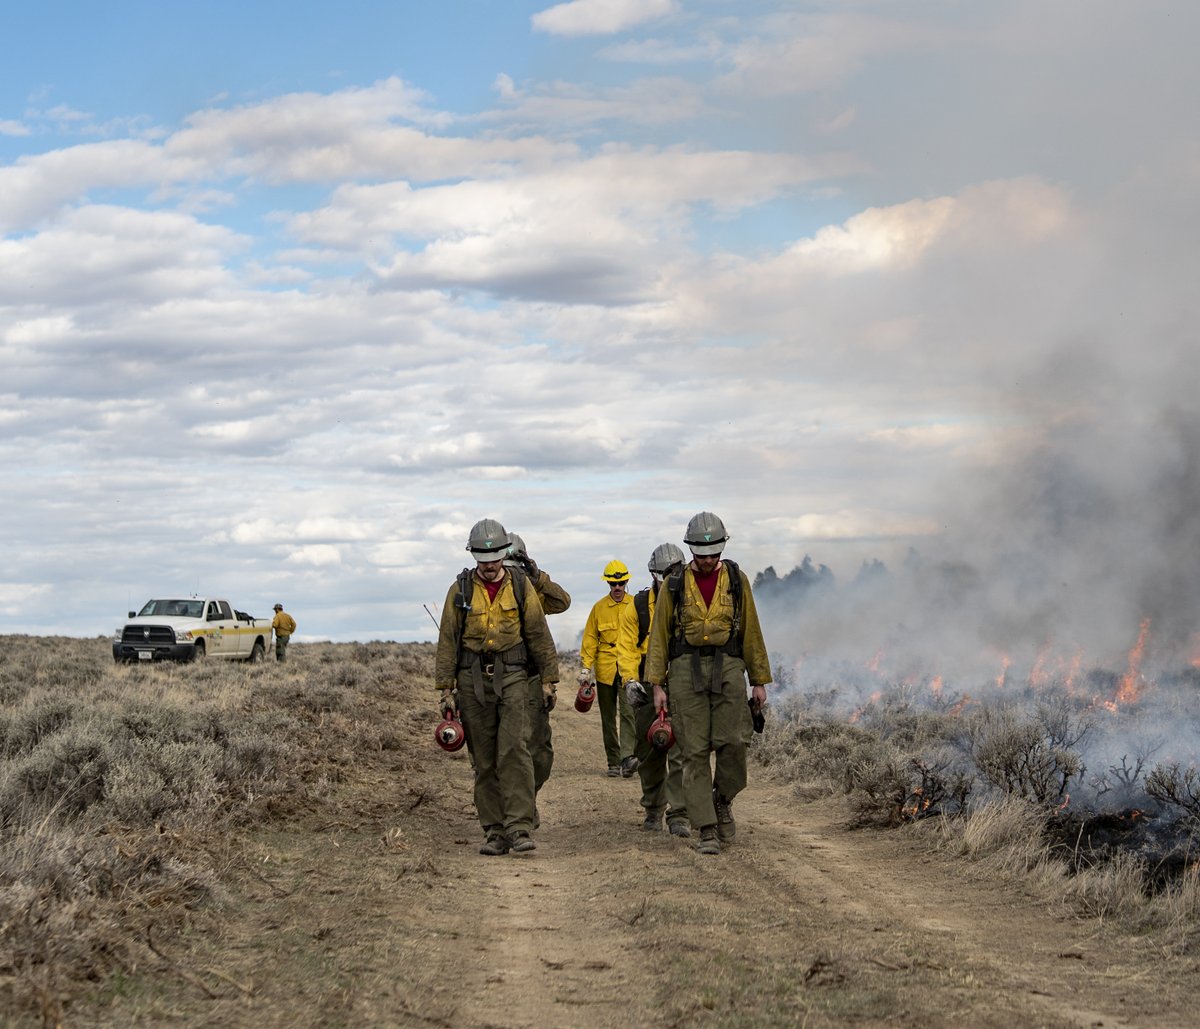 This week, the interagency wildland fire community is focusing on a #WeekofRemembrance, During this week, we underscore our commitment to the health, wellness and safety of our wildland firefighters. doi.gov/wildlandfire/n…
#DOIFireStories #ReadyforWildfire